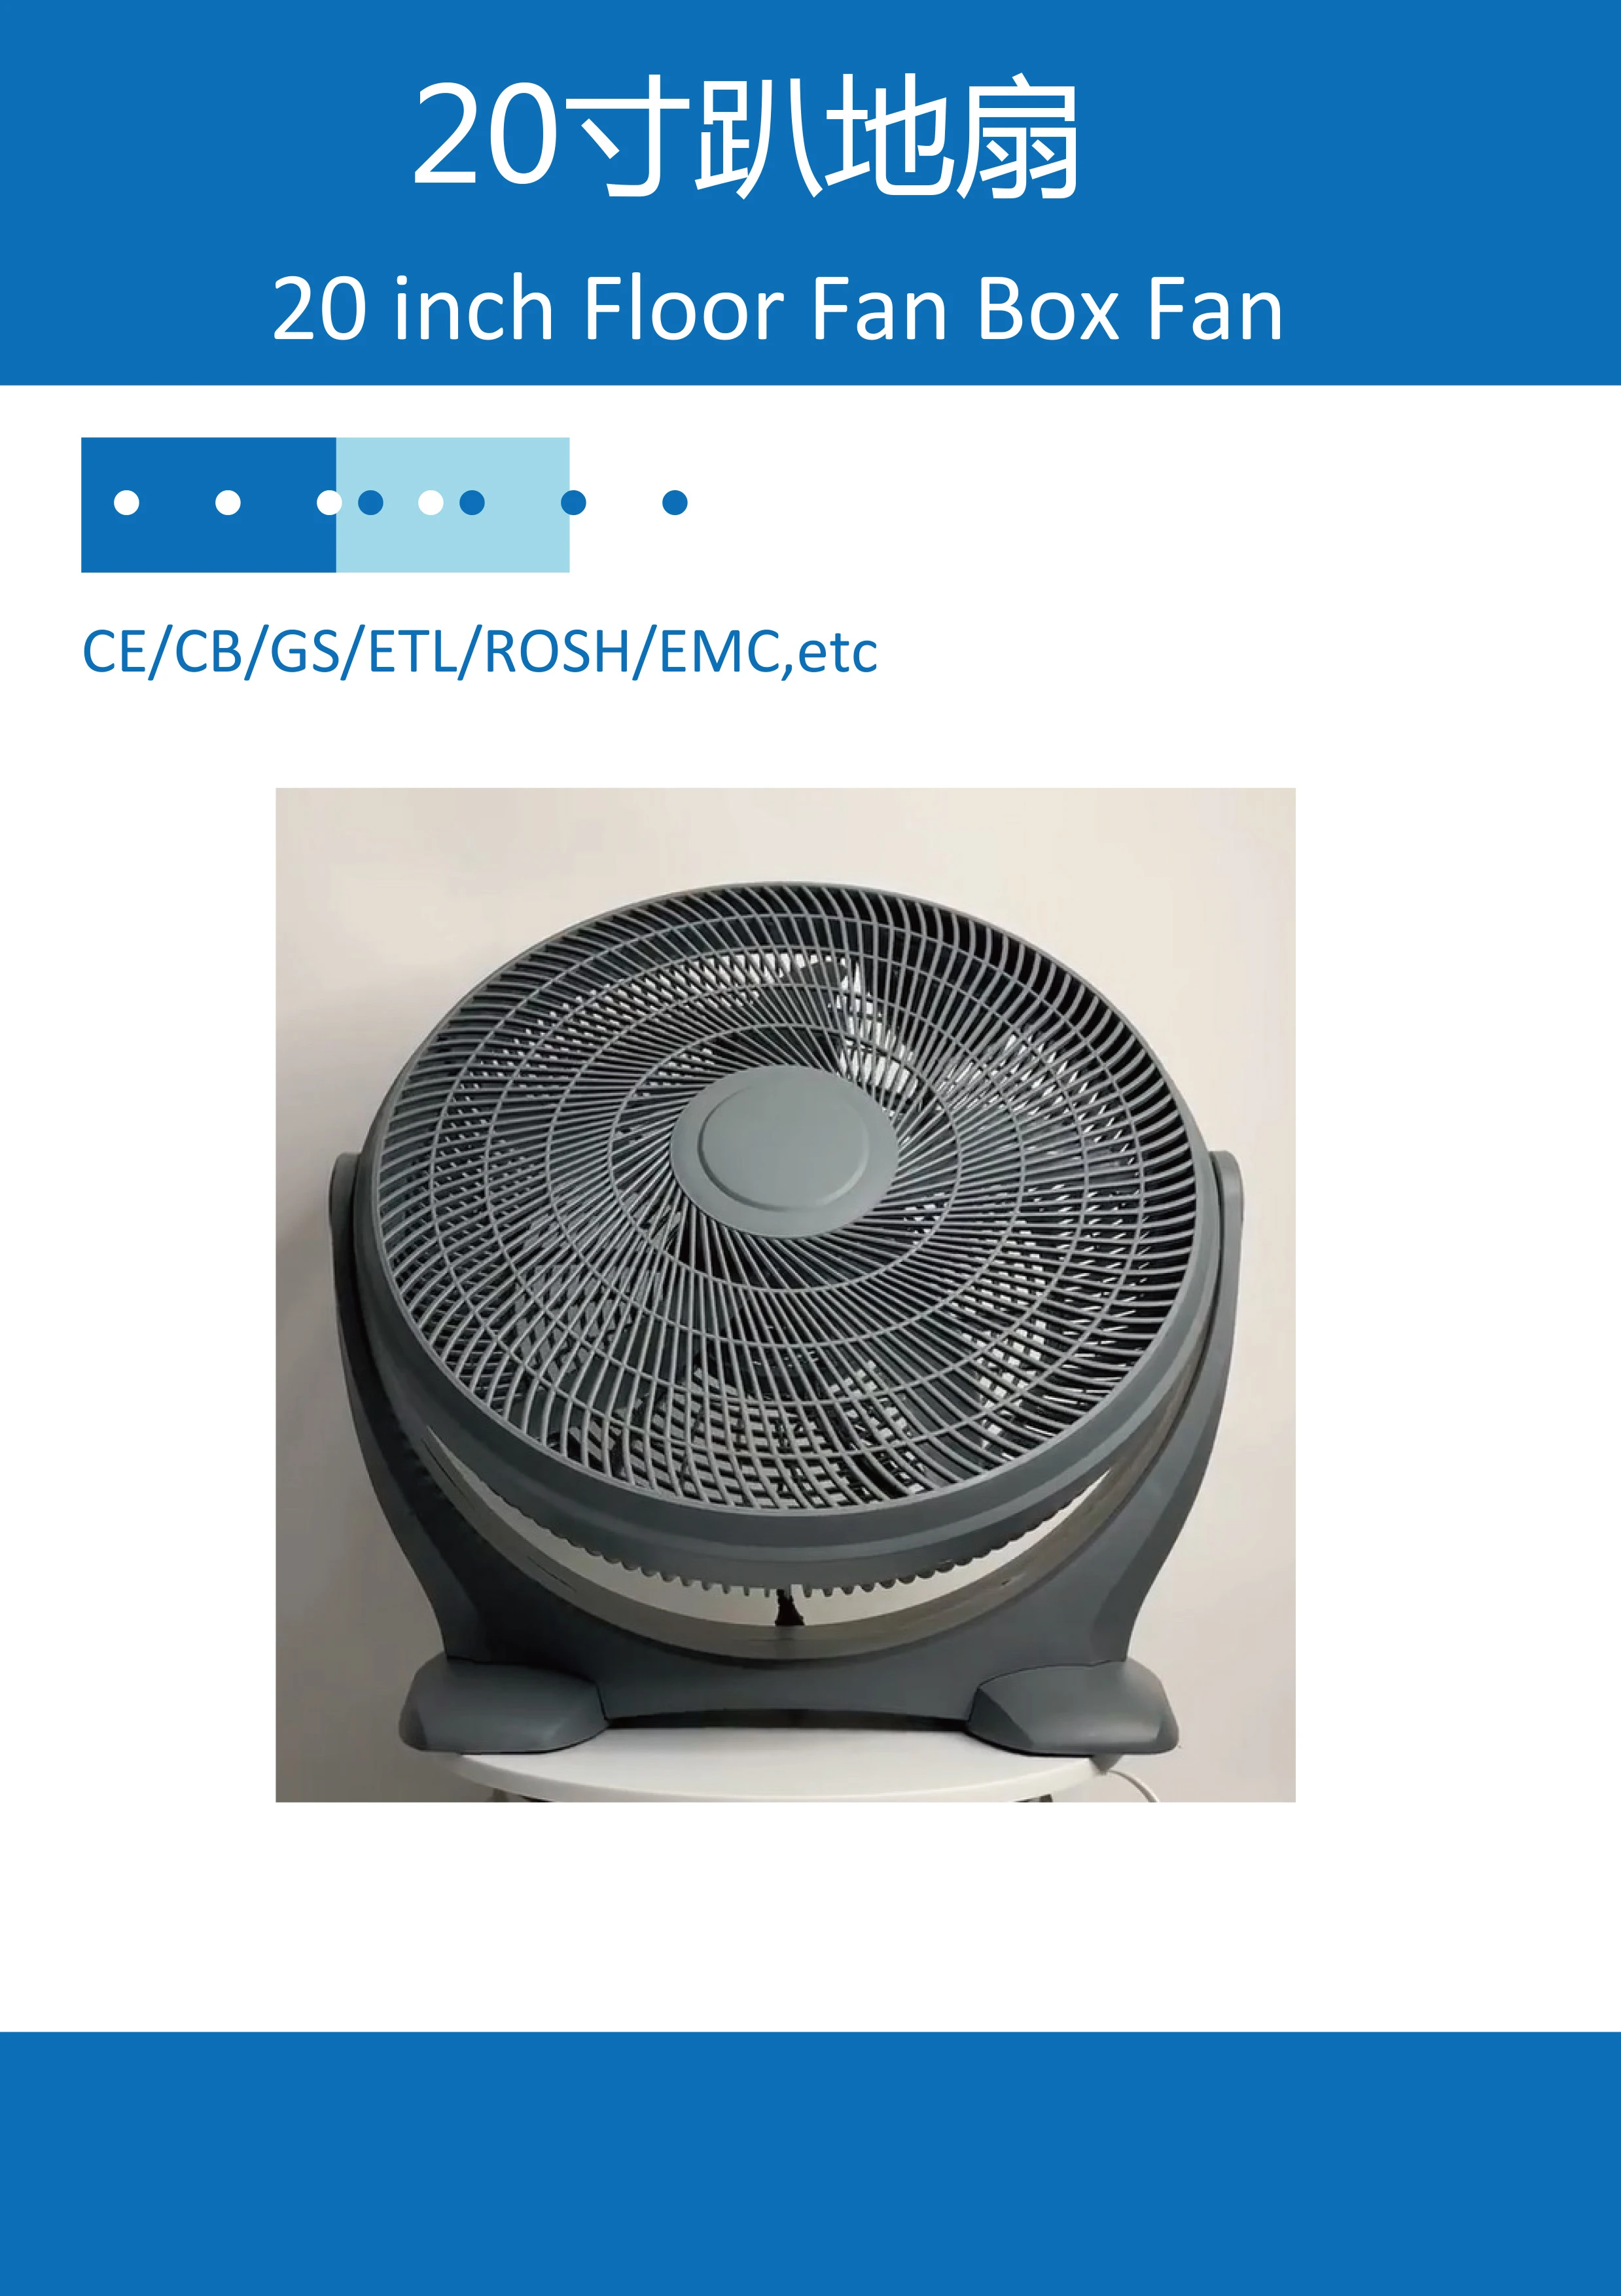 China Made Better Price High Quality 20 inch Floor Fan Box Fan 80W 3 Speed Settings 5 Blades Plastic Cooling Fan High Speed DC